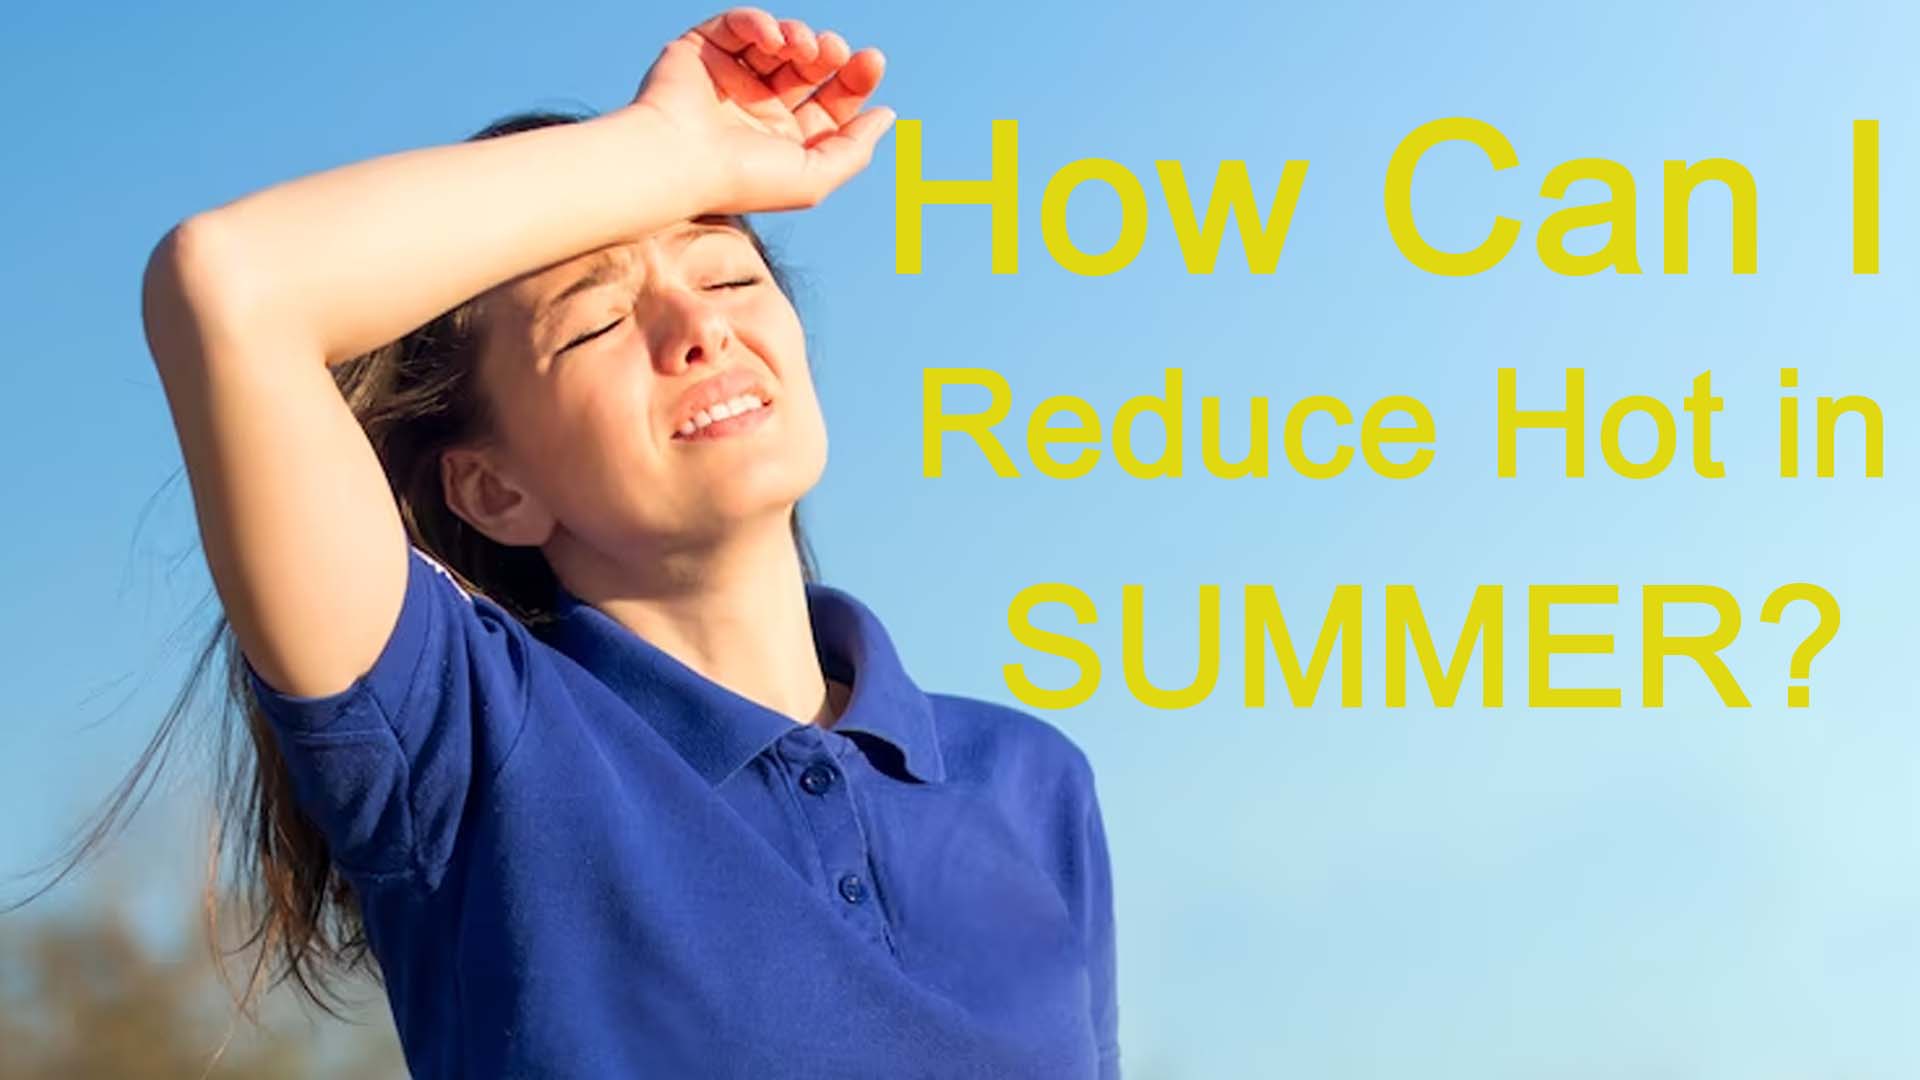 How Can I Reduce Hot in Summer?